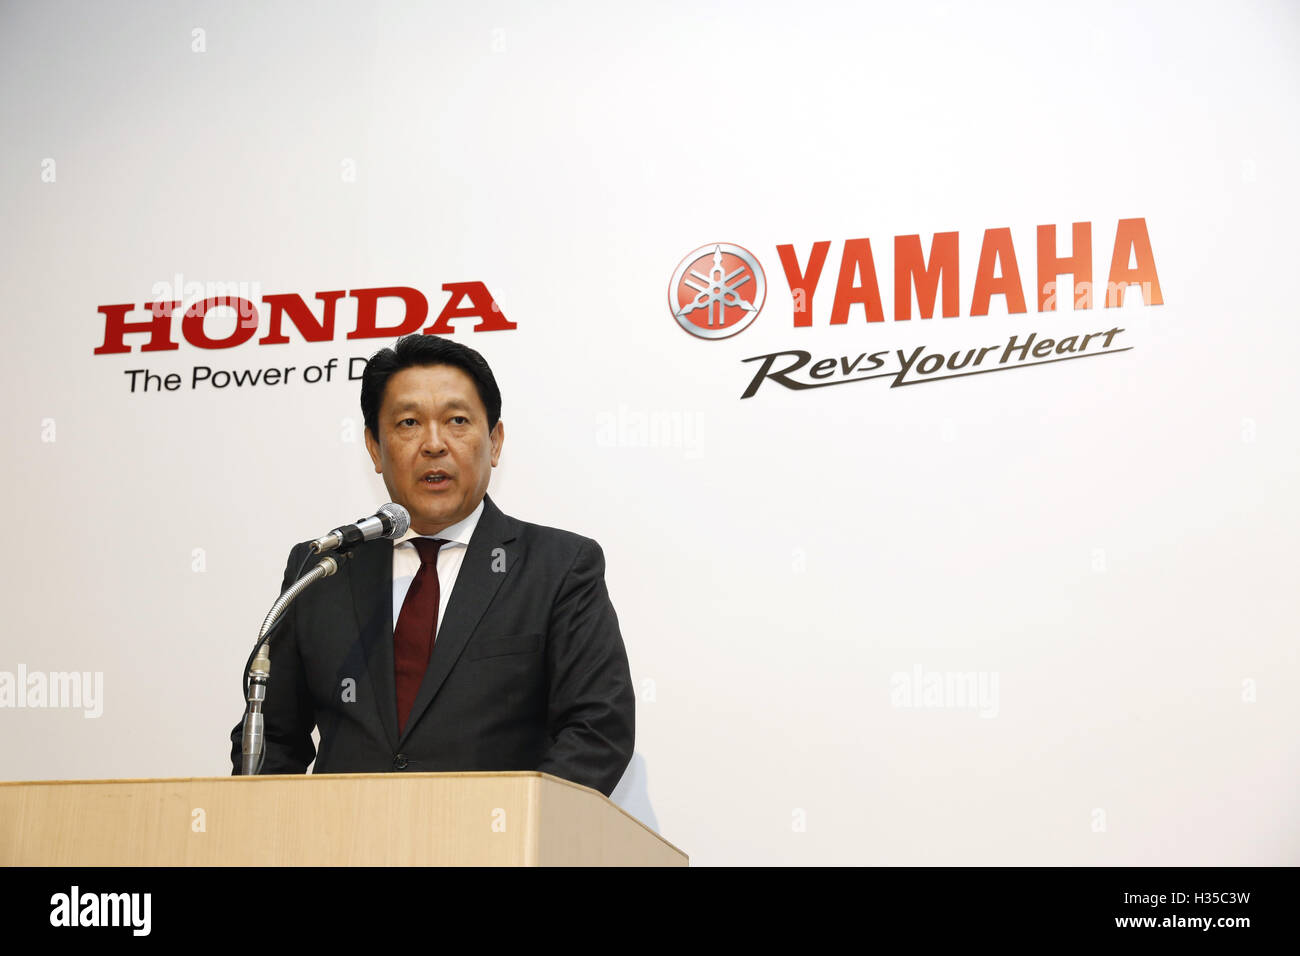 Honda Motor Operating Officer and Director Shinji Aoyama attends a joint press conference in Tokyo, Japan on October 5, 2016. Japanese auto majors Honda and Yamaha announced they have started talks toward a business tie-up in the development and production of small scooters. © Yosuke Tanaka/AFLO/Alamy Live News Stock Photo